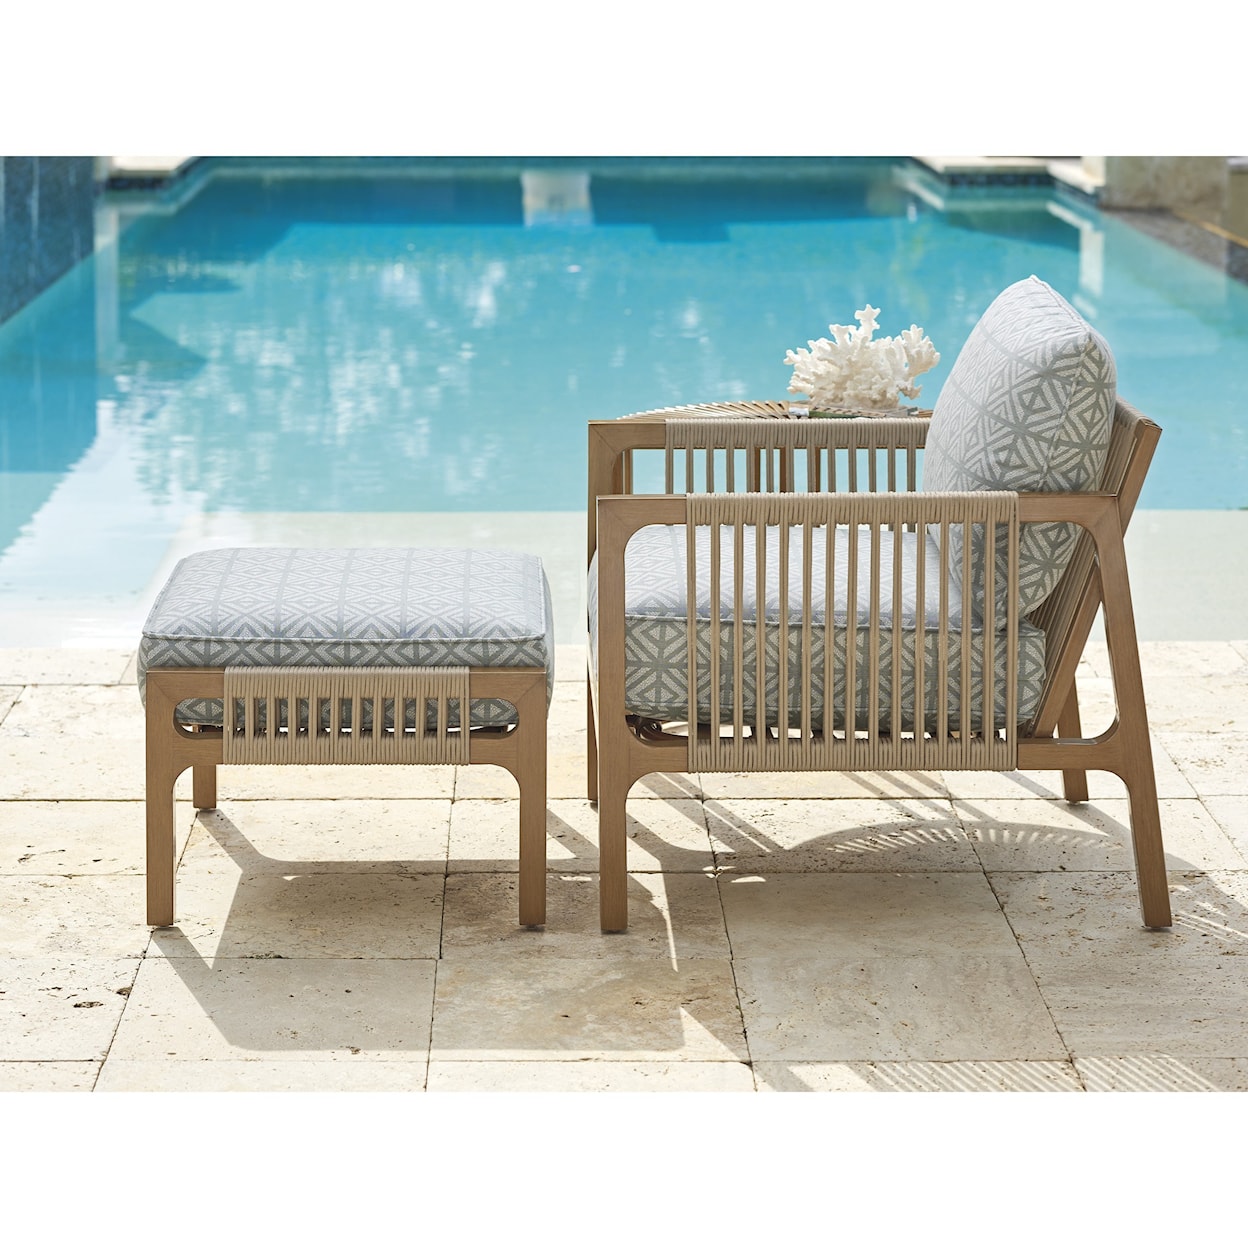 Tommy Bahama Outdoor Living St Tropez Ottoman